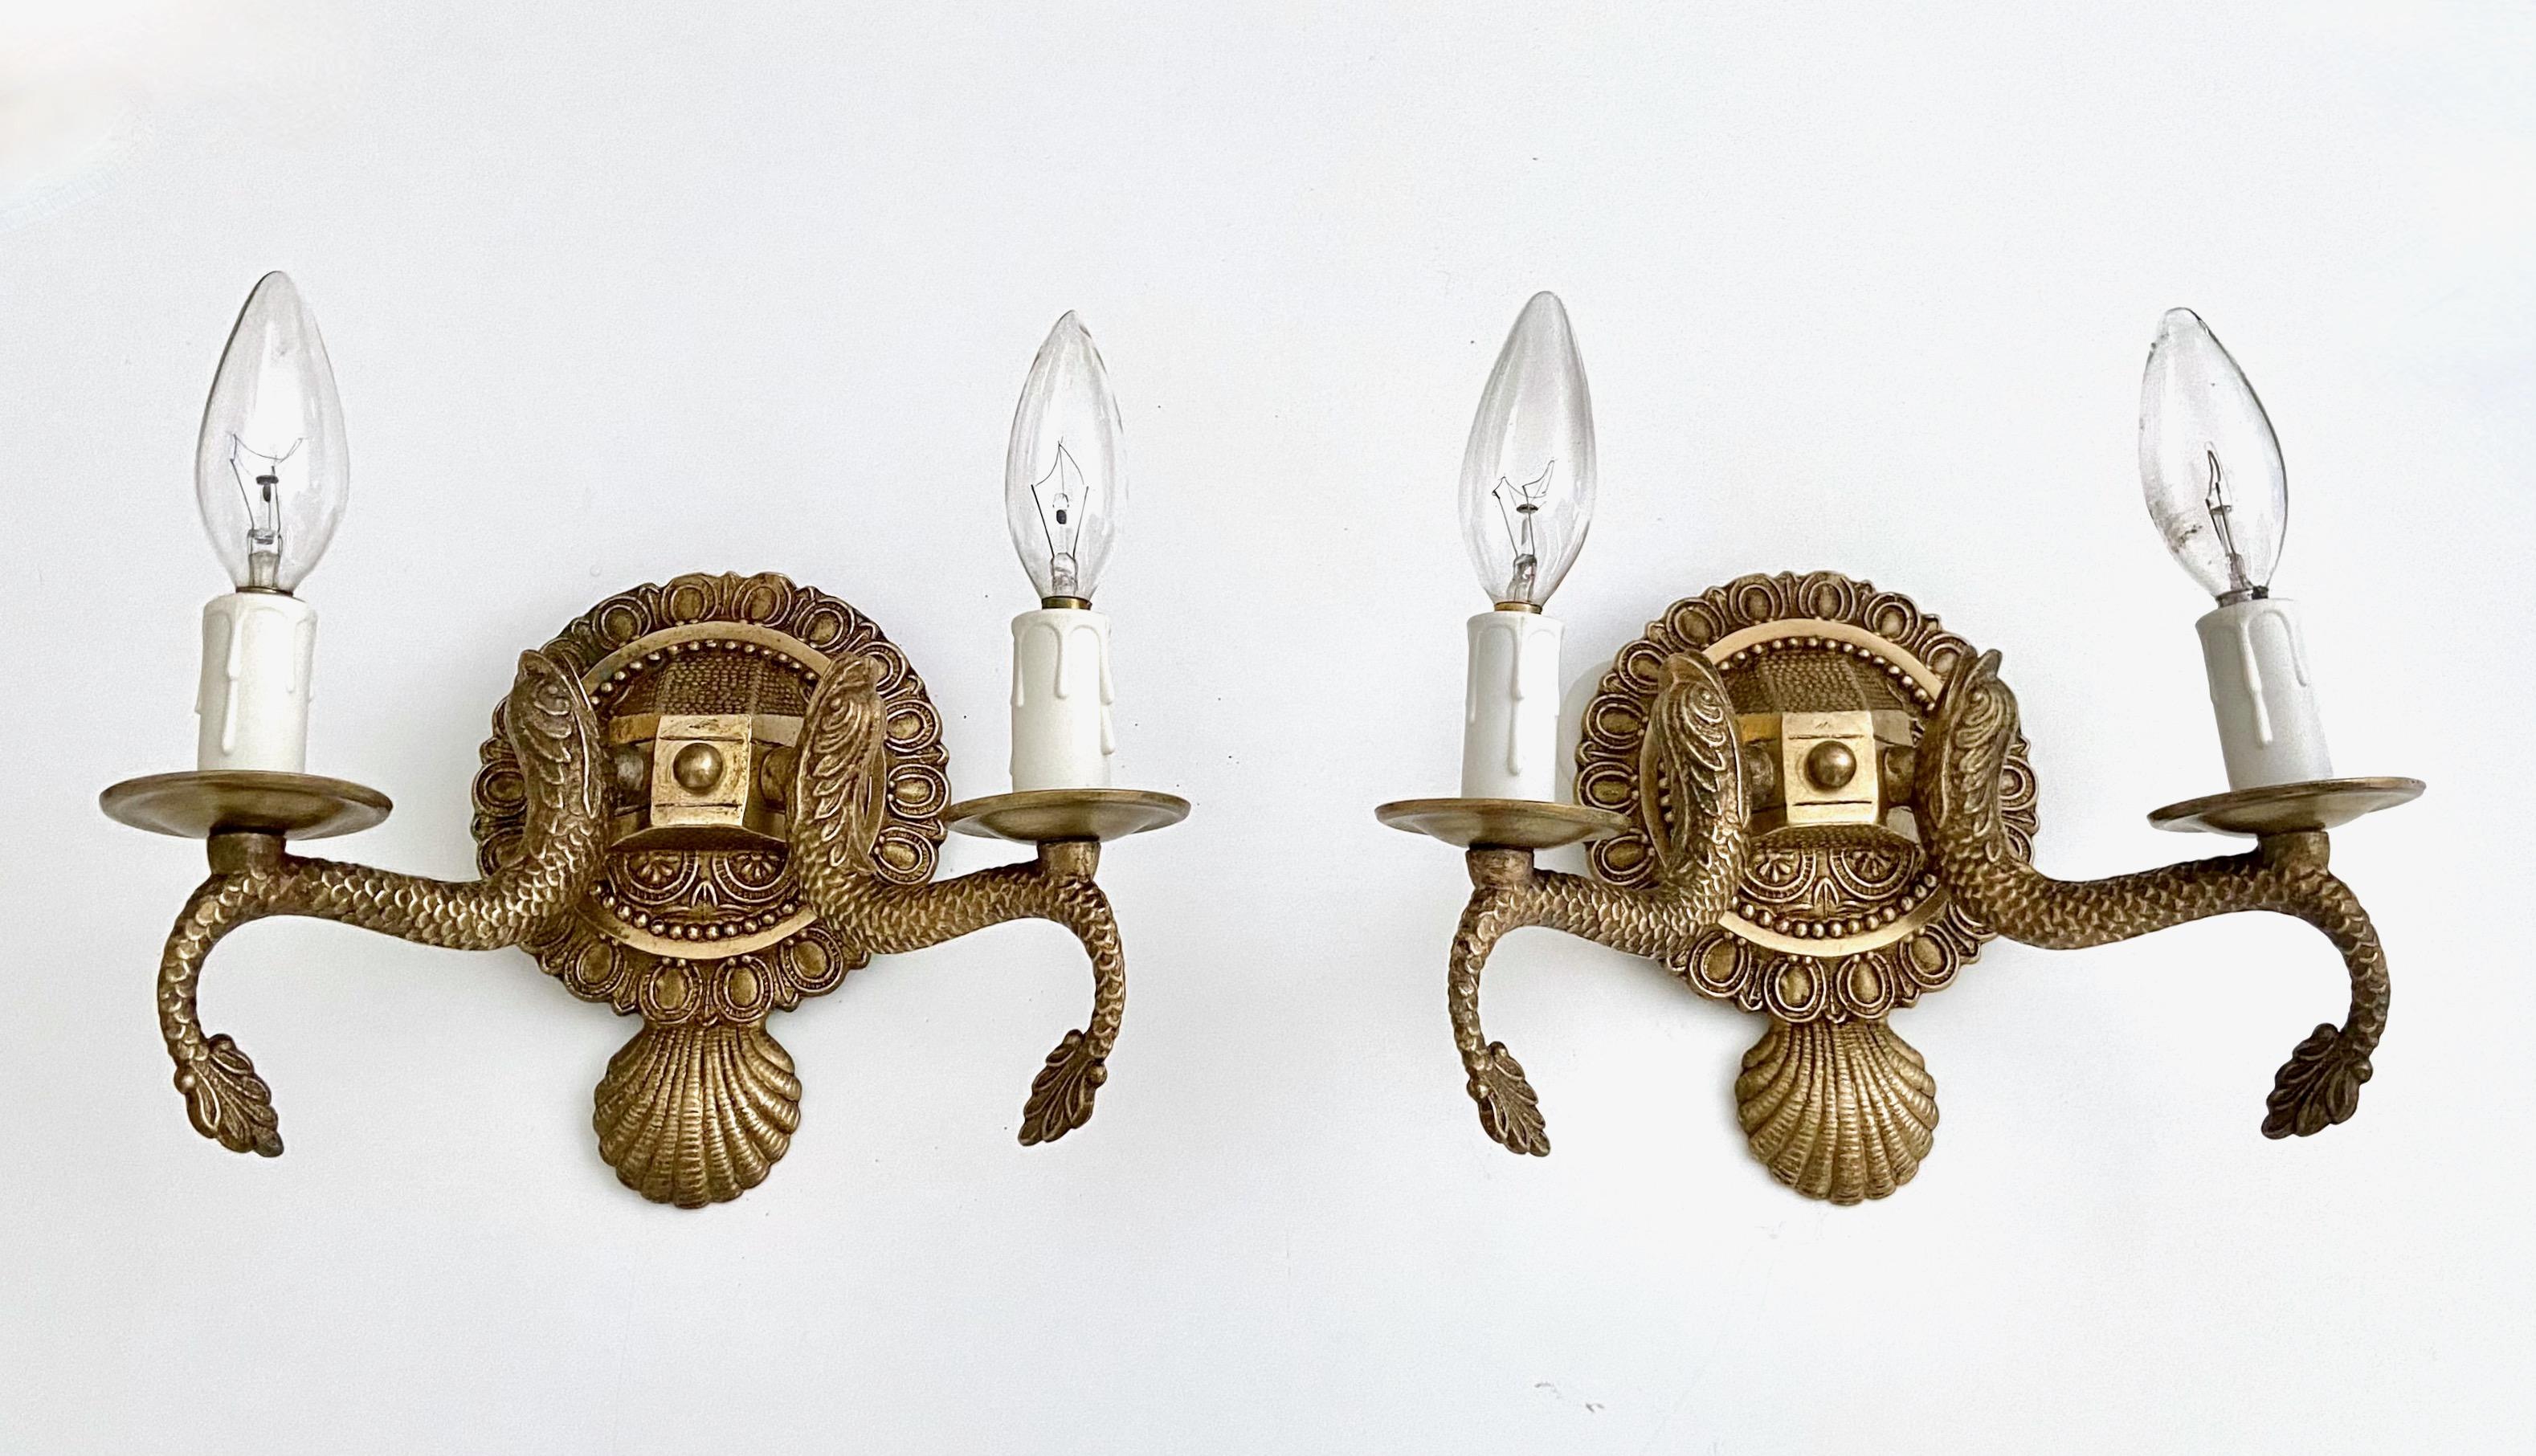 Pair of European two-light neoclassic style brass wall sconces with dolphin and claim shell motif. Expertly crafted with nice quality detailing throughout. Newly wired with new candelabra sockets. Additional pairs available under separate listing.